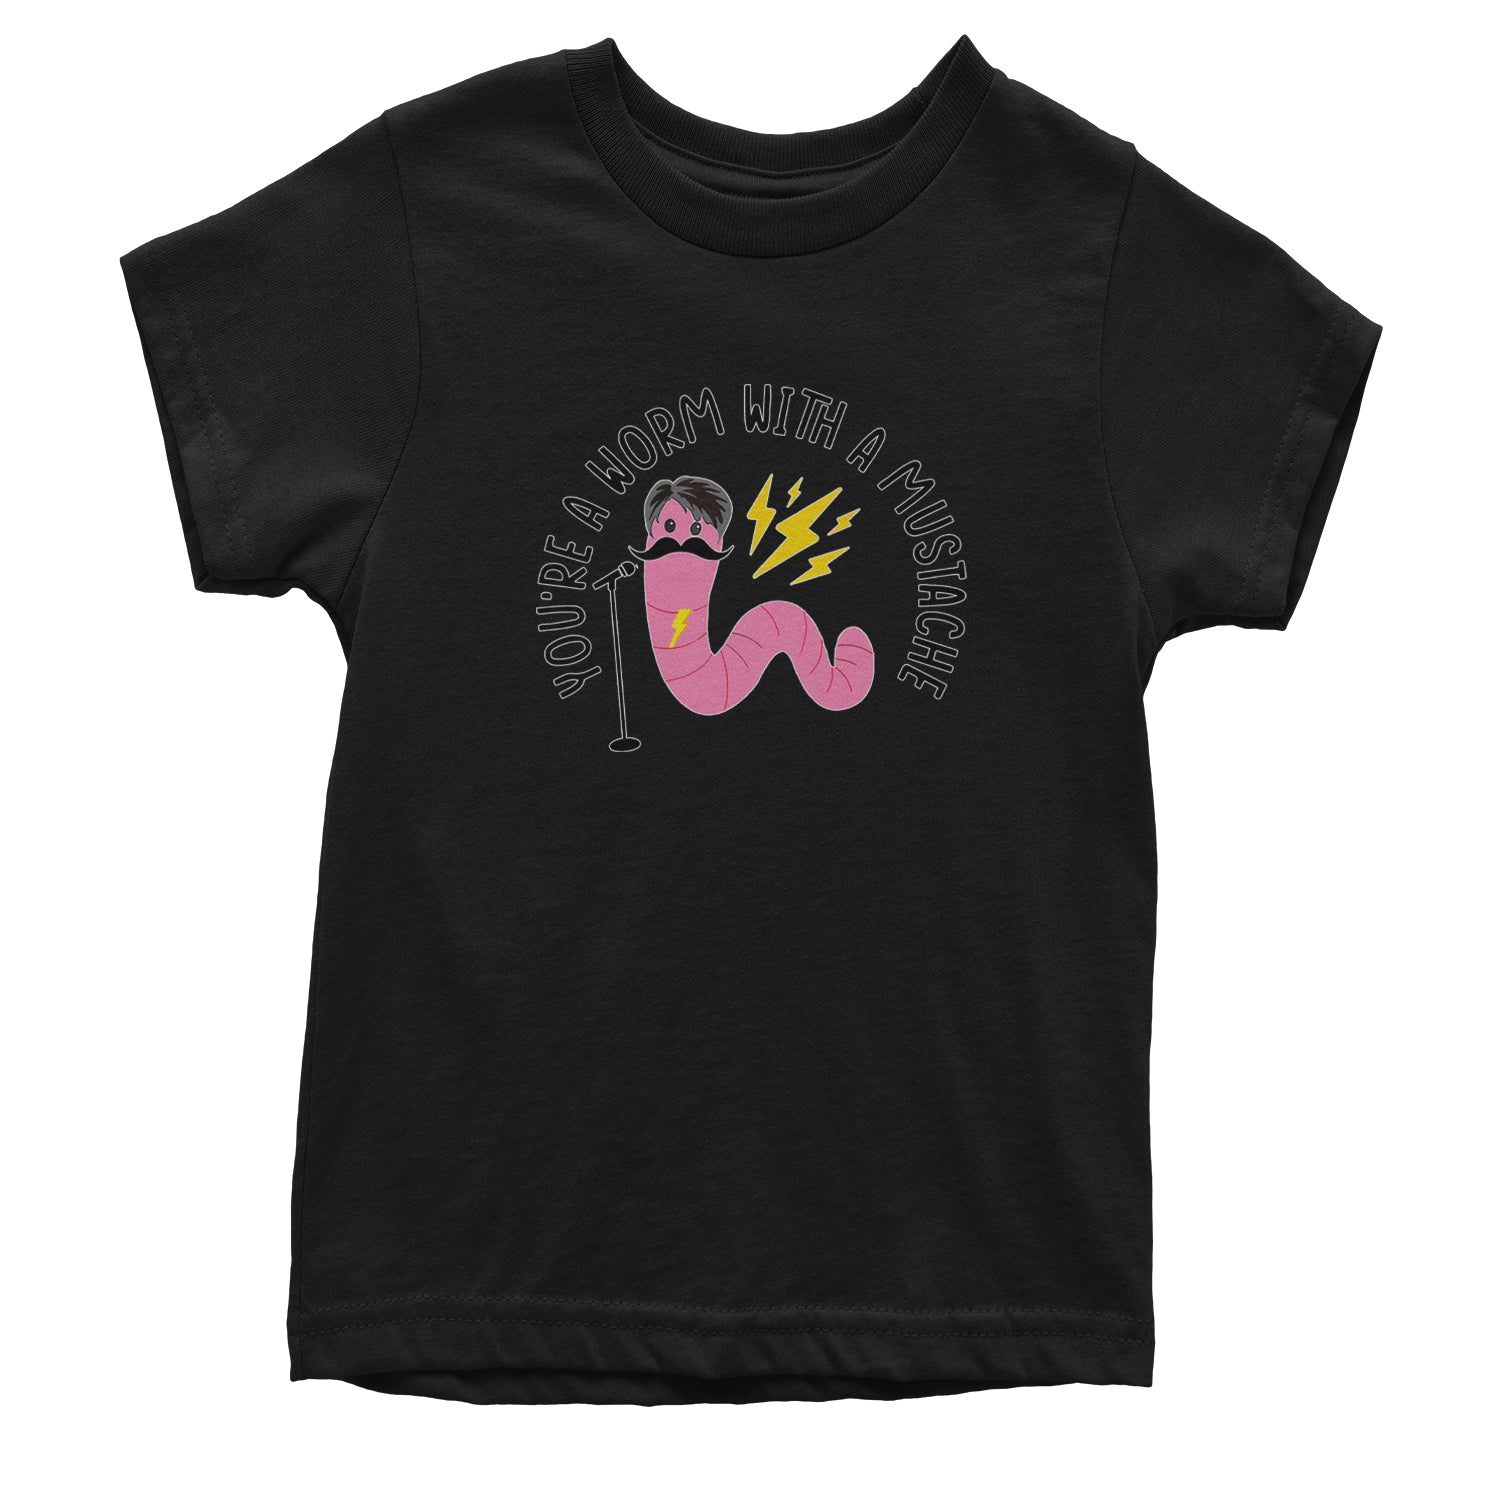 You're A Worm With A Mustache Tom Scandoval Youth T-shirt